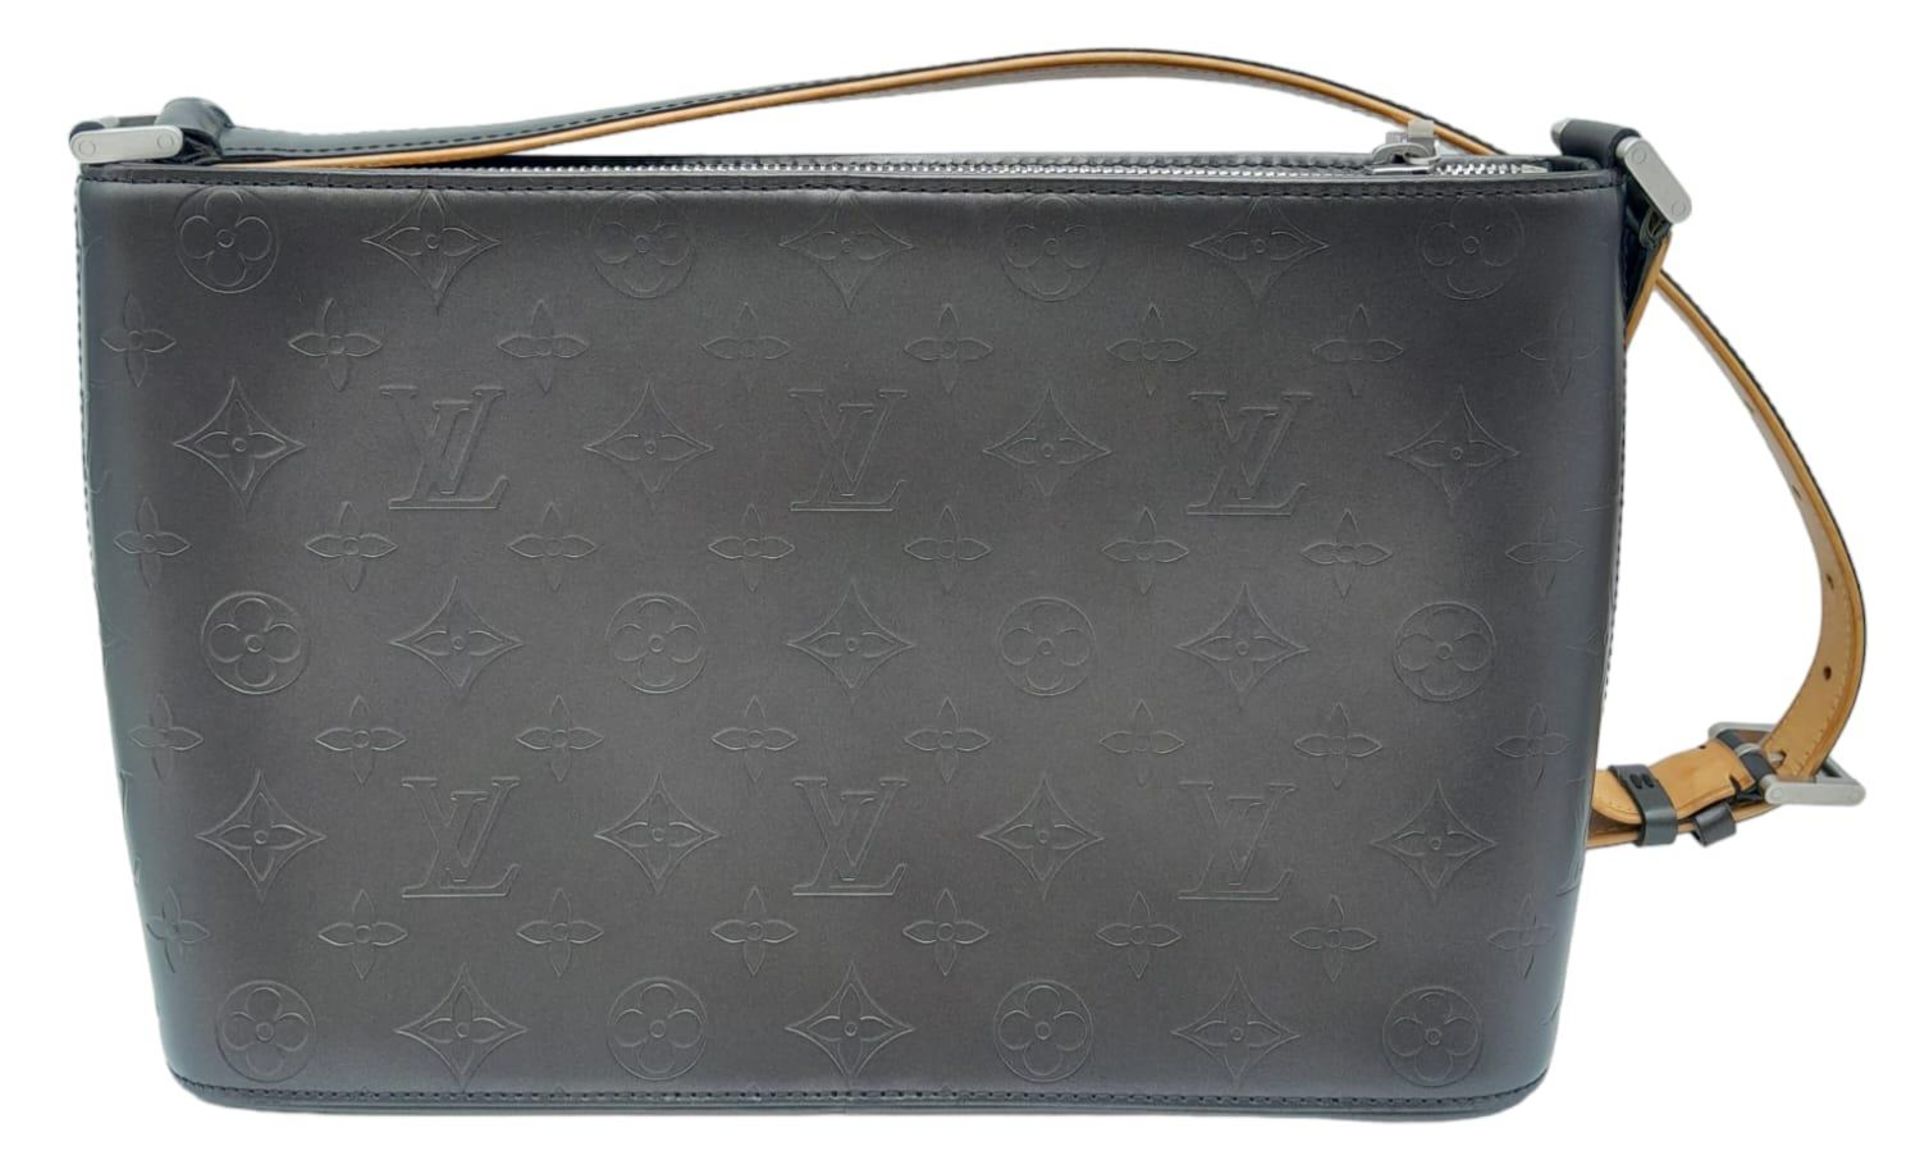 Louis Vuitton Black Leather Handbag. LV monogrammed, silver tone hardware and adjustable 2-toned - Image 3 of 7